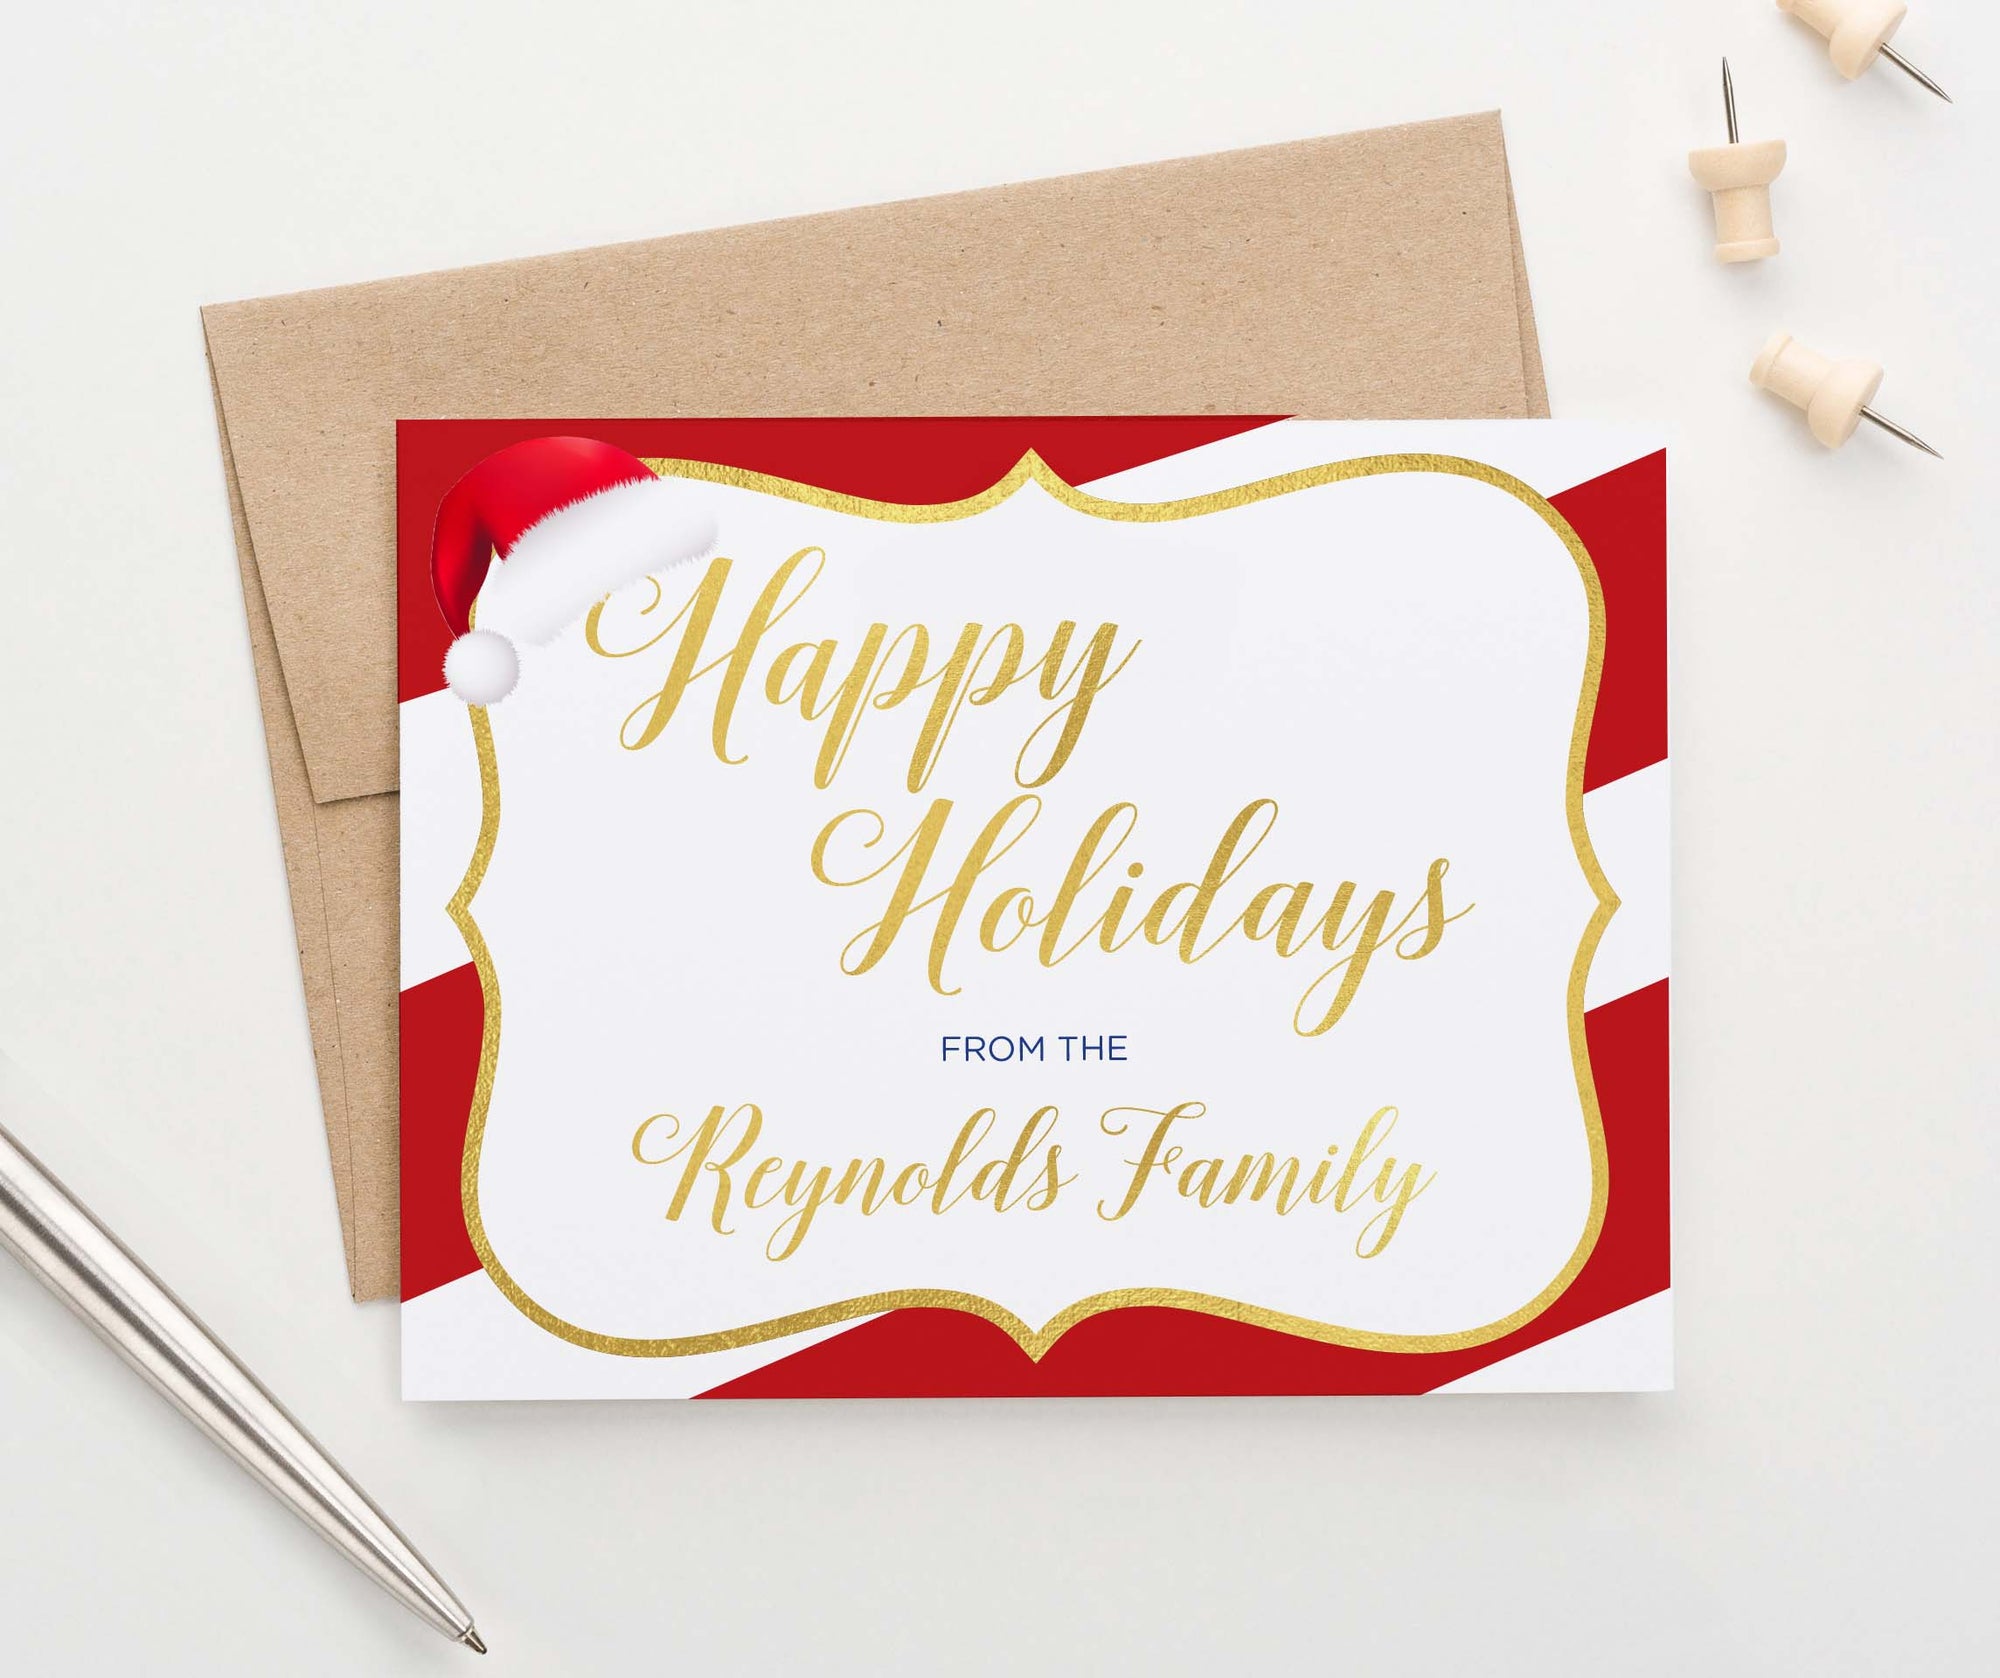 HGC006 personalized holiday cards with candy cane striped border gold modern